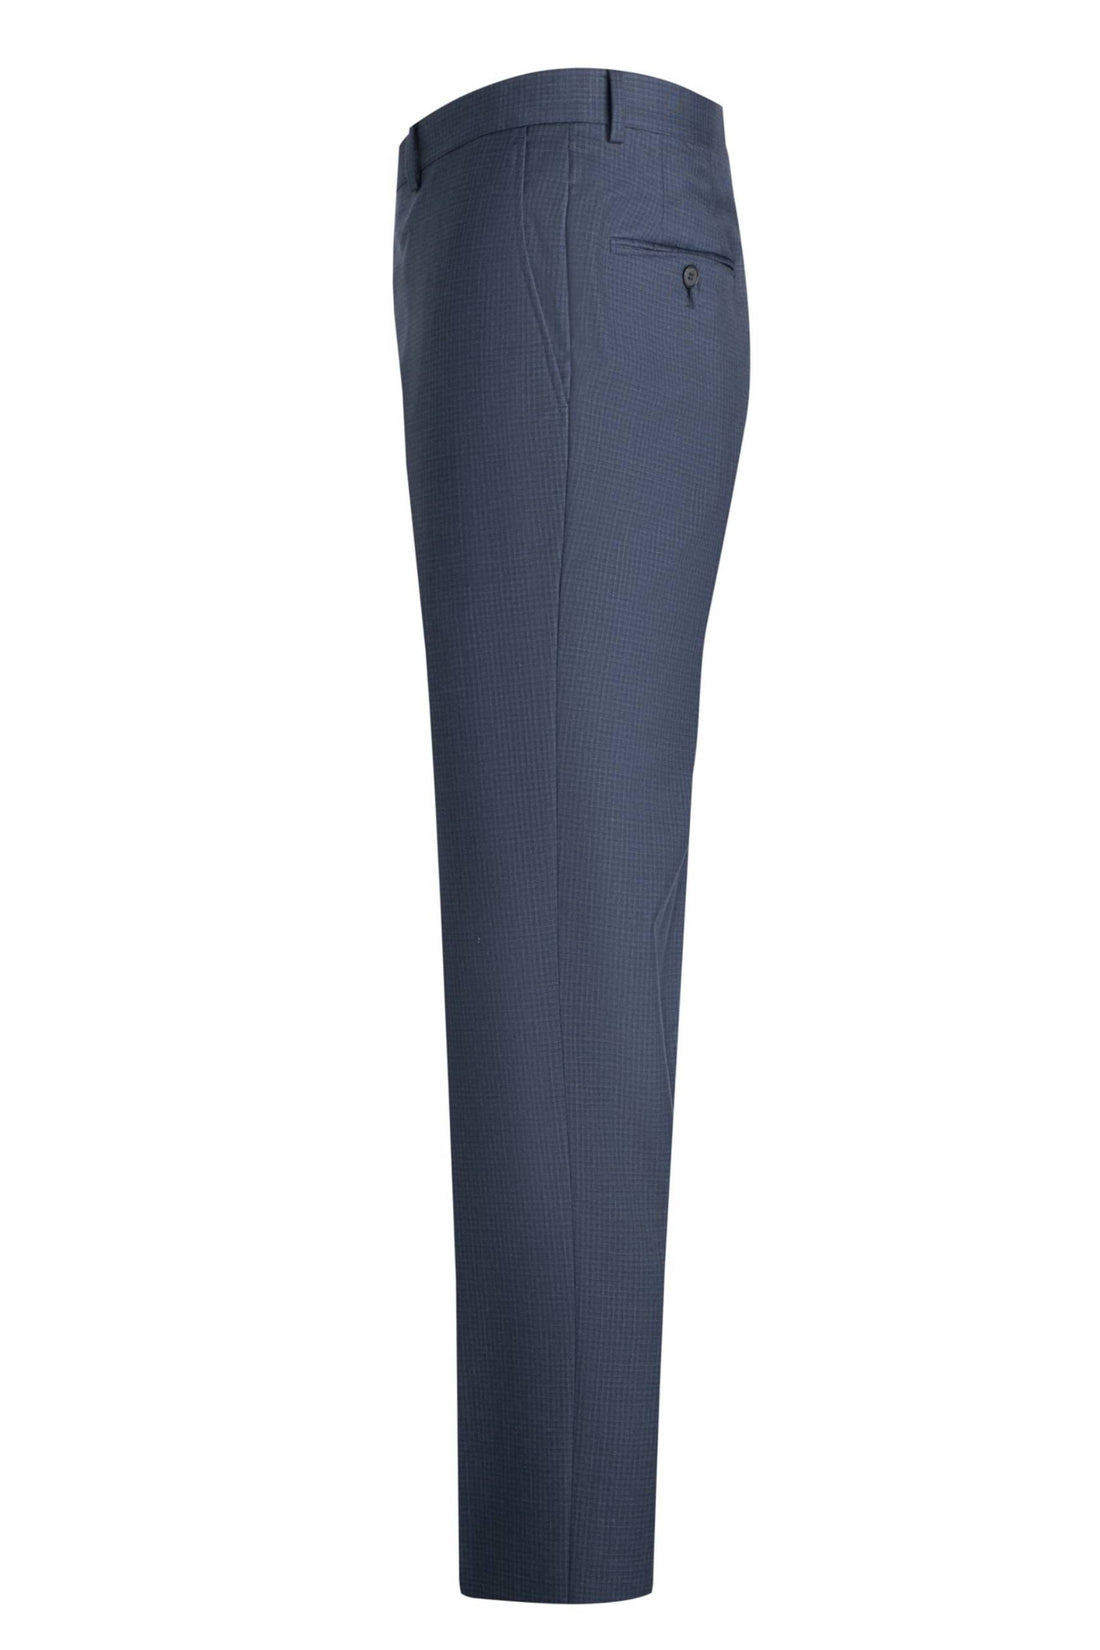 Heritage Gold Blue Super 150s Microcheck Suit Side Pant